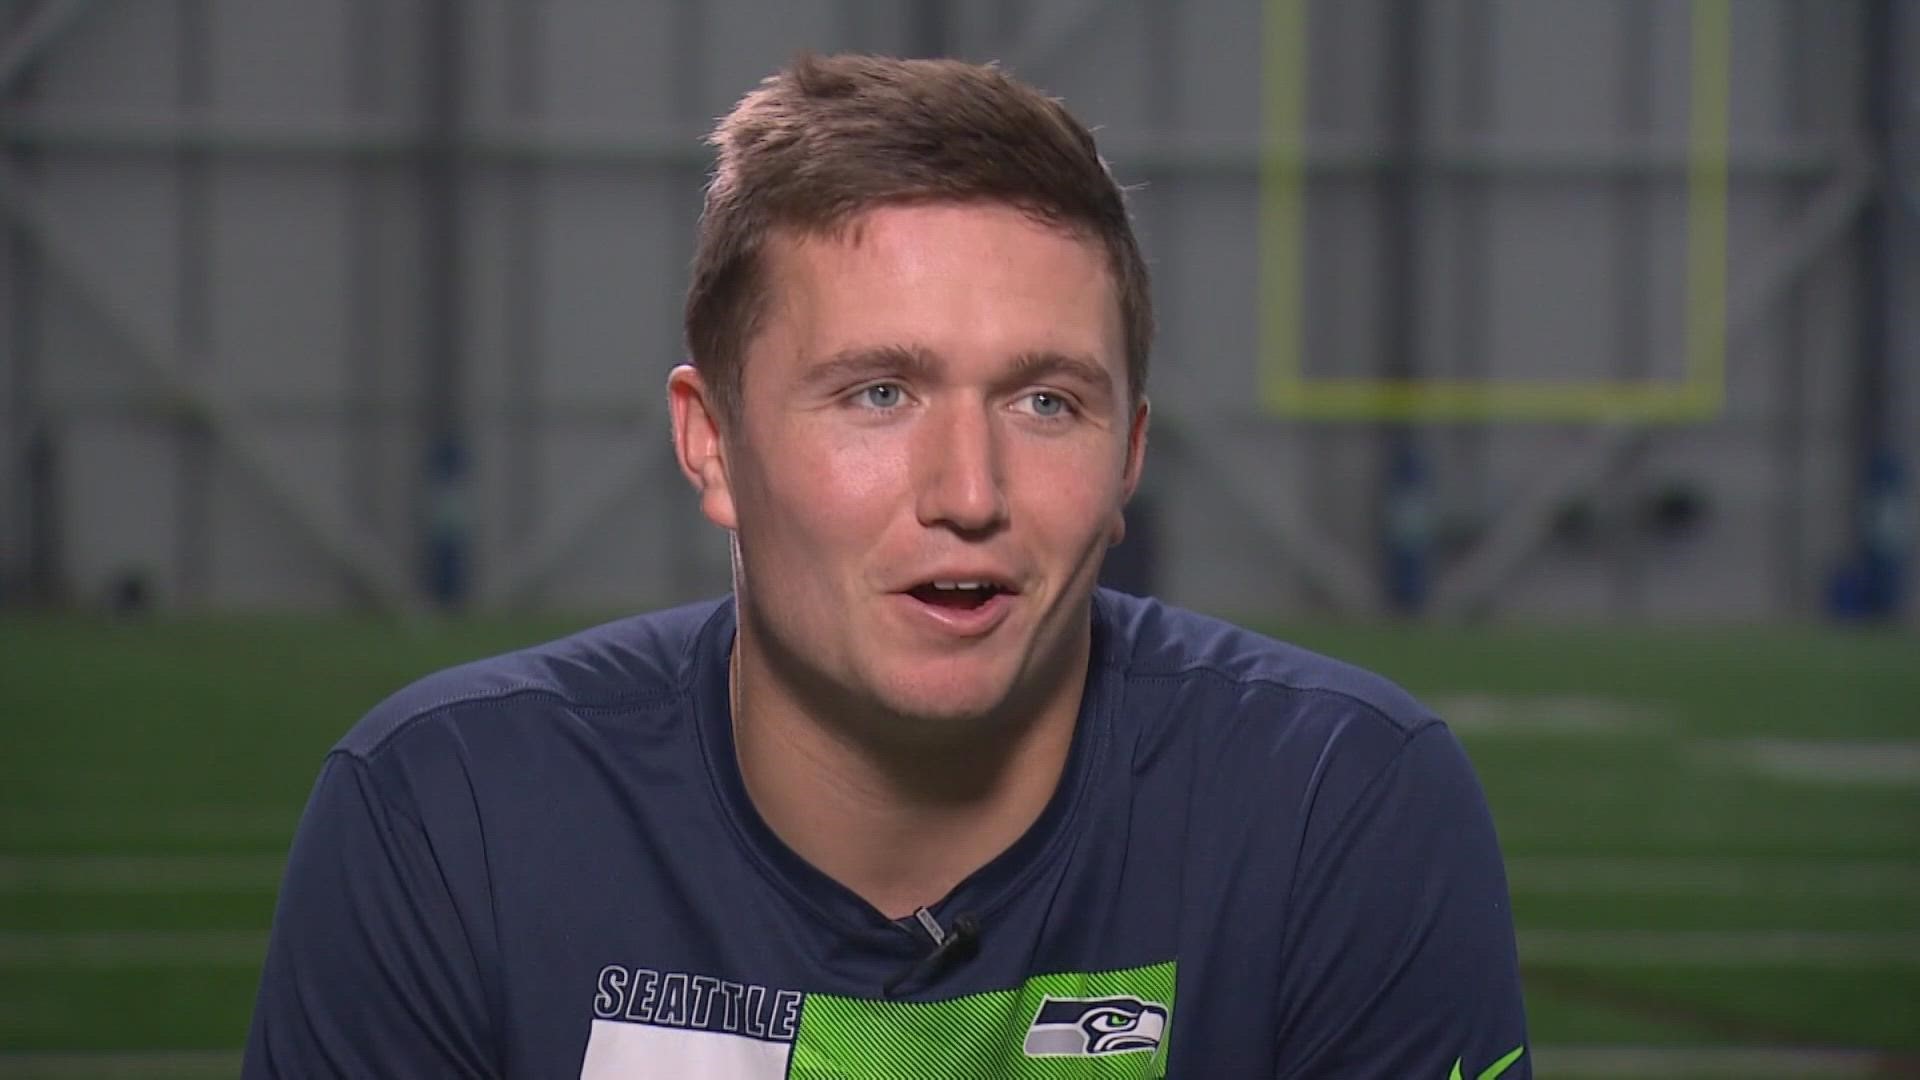 Seahawks quarter back Drew Lock sits down with Paul Silvi to talk about keeping it real, his viral rap video and his upcoming golf match with tight end Will Dissly.